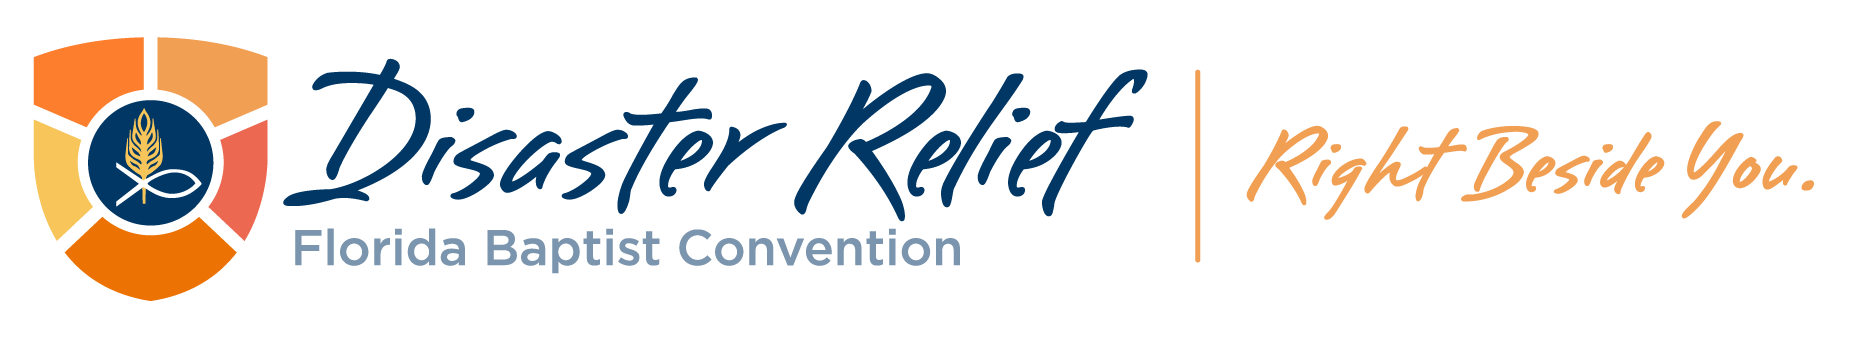 Florida Baptist Convention, Disaster Relief